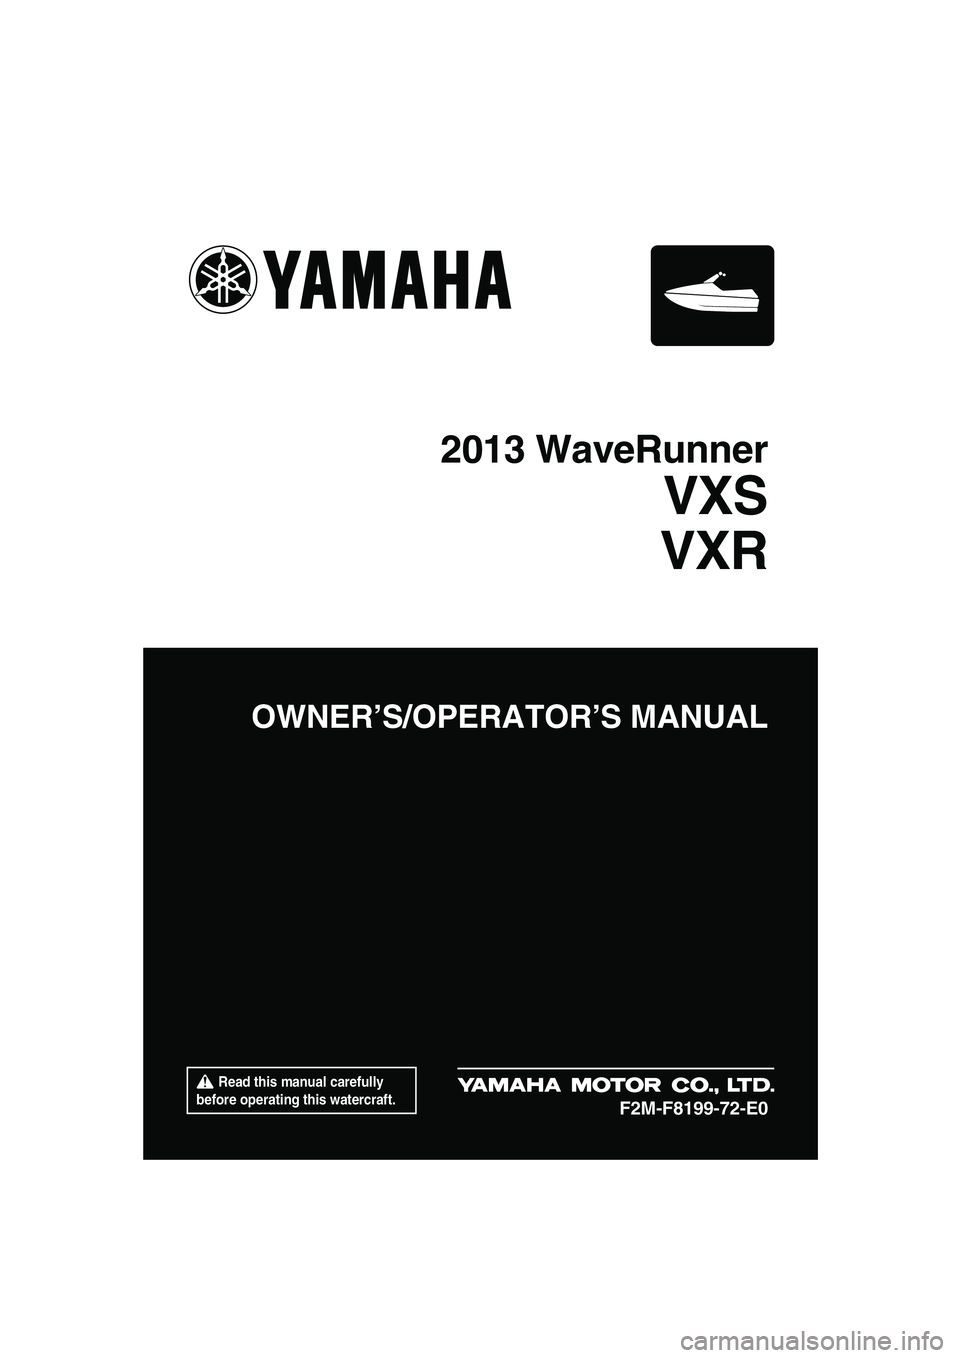 YAMAHA VXR 2013  Owners Manual  Read this manual carefully 
before operating this watercraft.
OWNER’S/OPERATOR’S MANUAL
2013 WaveRunner
VXS
VXR
F2M-F8199-72-E0
UF2M72E0.book  Page 1  Thursday, July 12, 2012  5:05 PM 